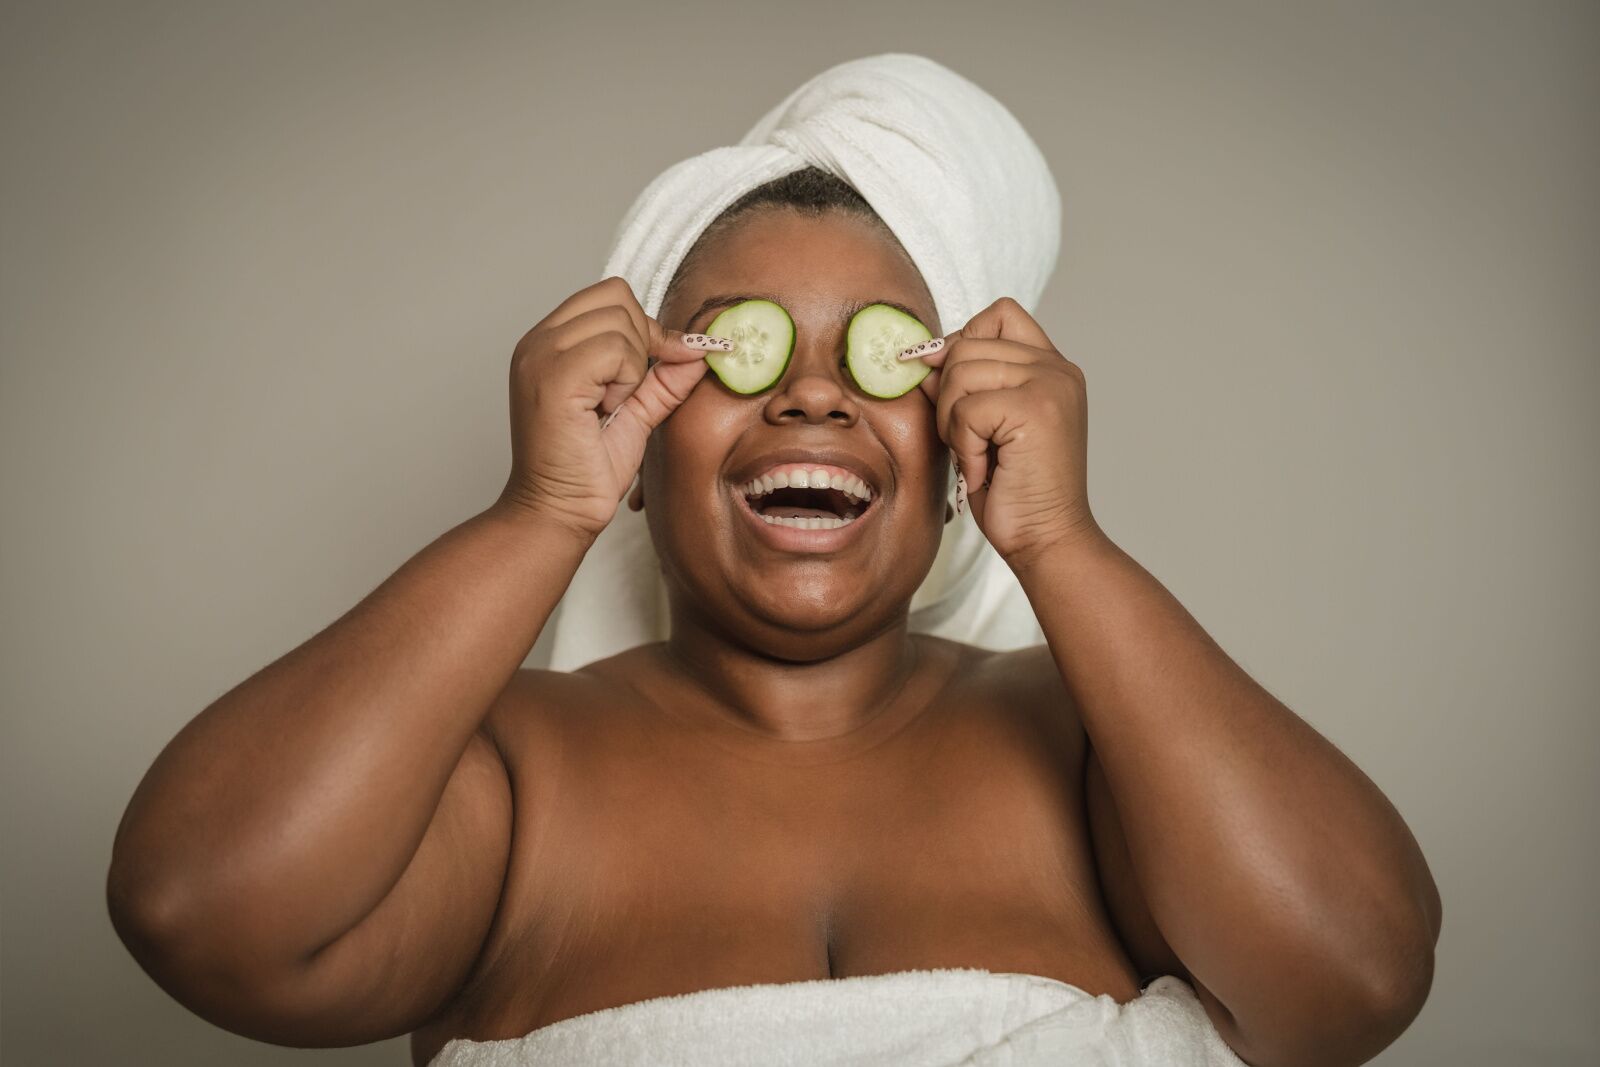 Plus-size spa goer aftewr a facial